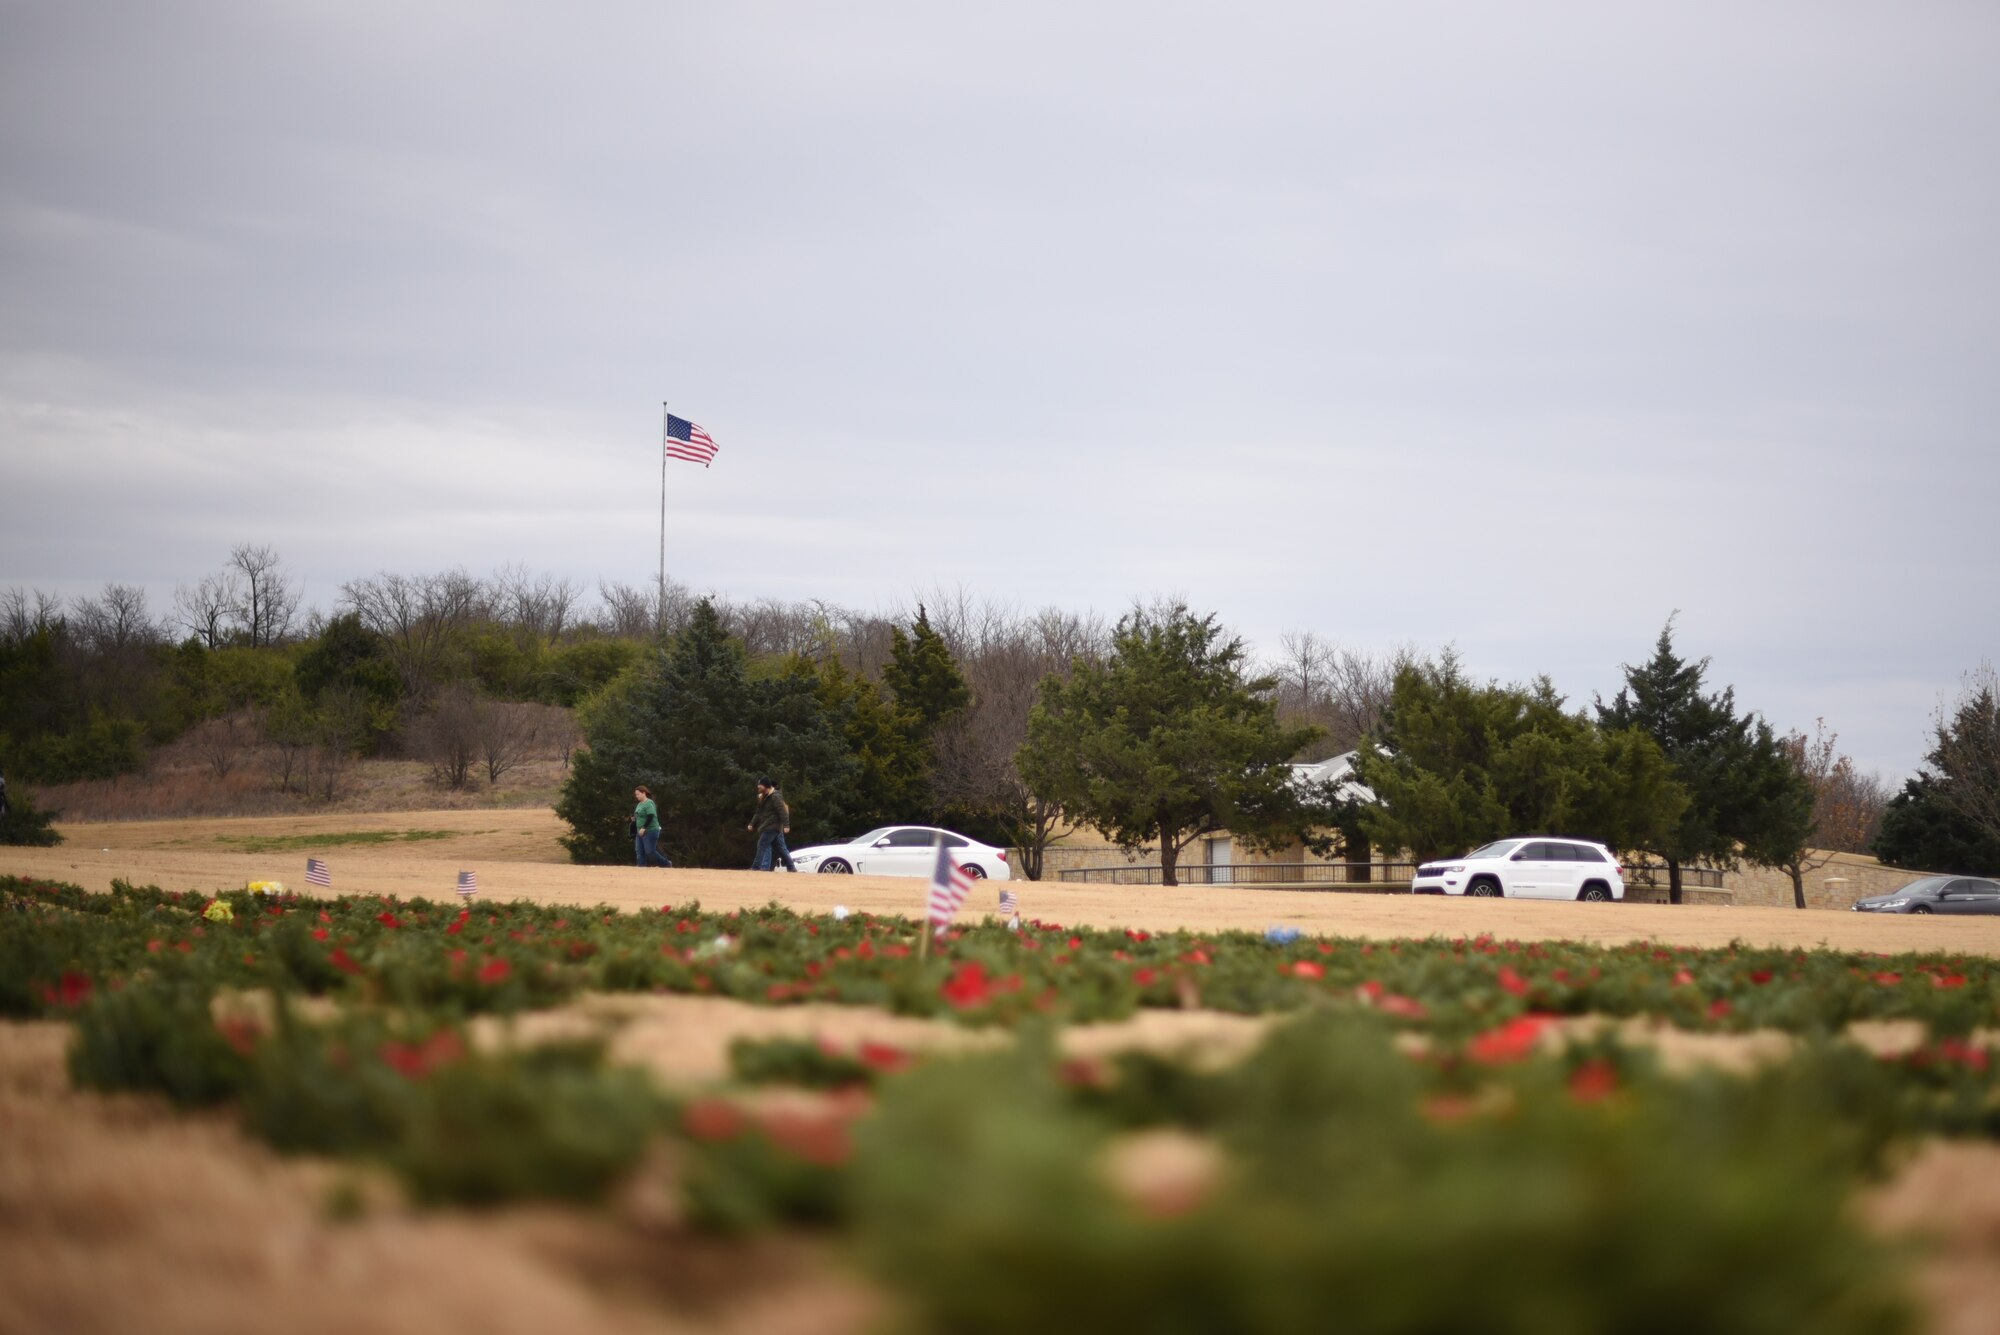 The U.S. flag flies over the Dallas-Fort Worth National Cemetery on Dec. 18, 2021. Volunteers from the DFW community joined together to honor veterans during the Wreaths Across America event. (U.S. Air Force photo by Staff Sgt. Randall Moose)